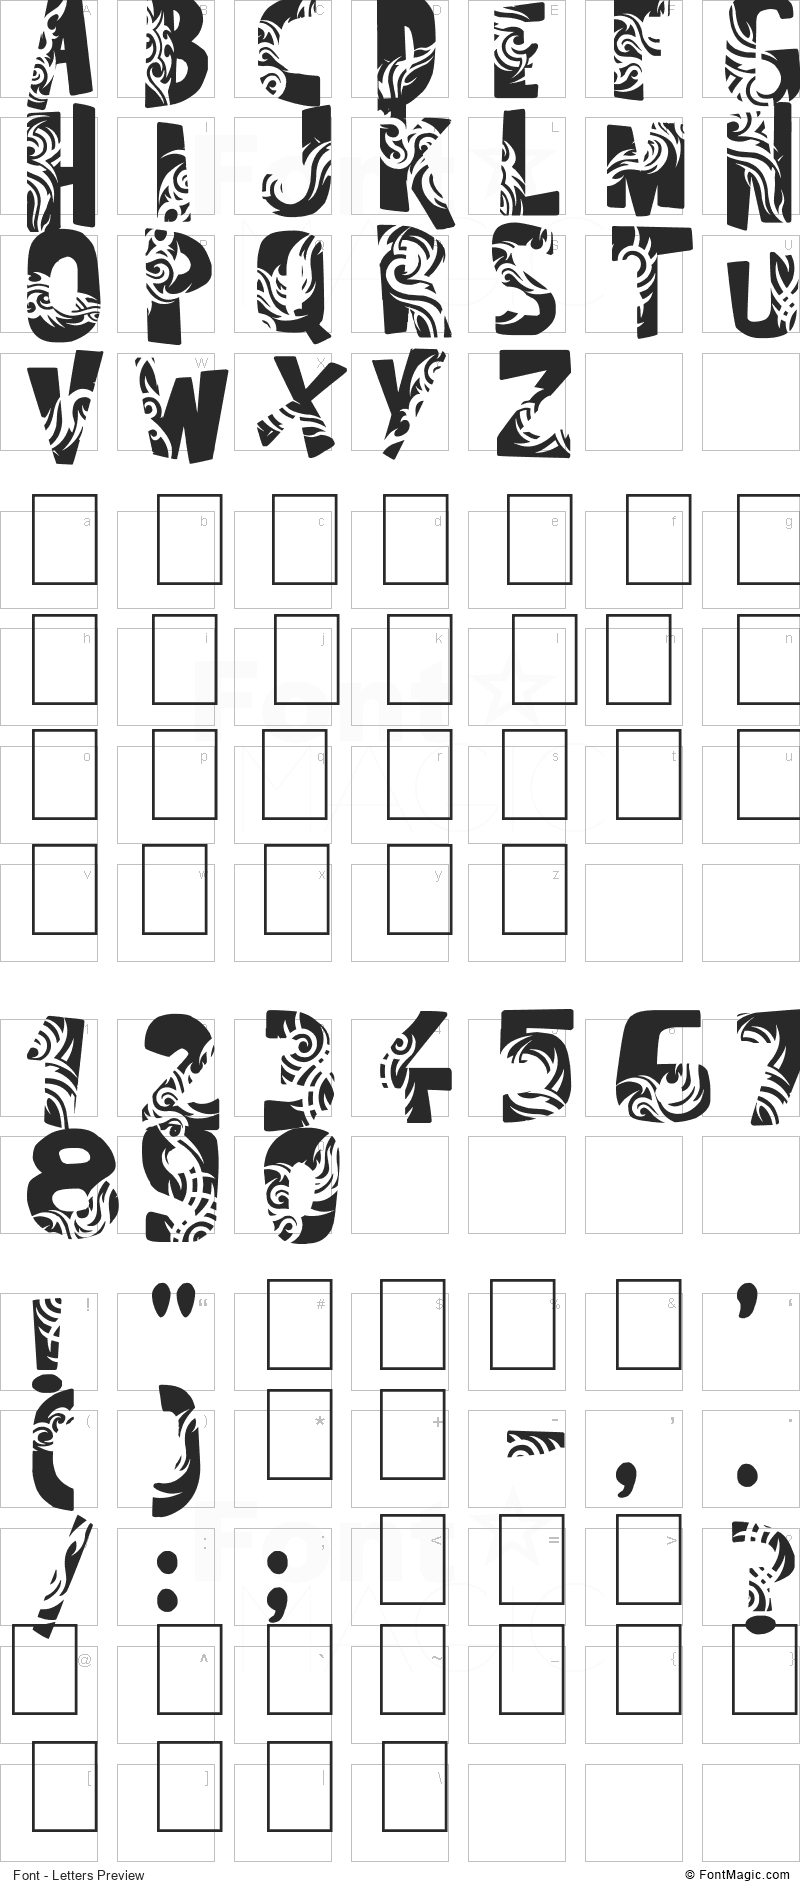 Tuamotu Font - All Latters Preview Chart